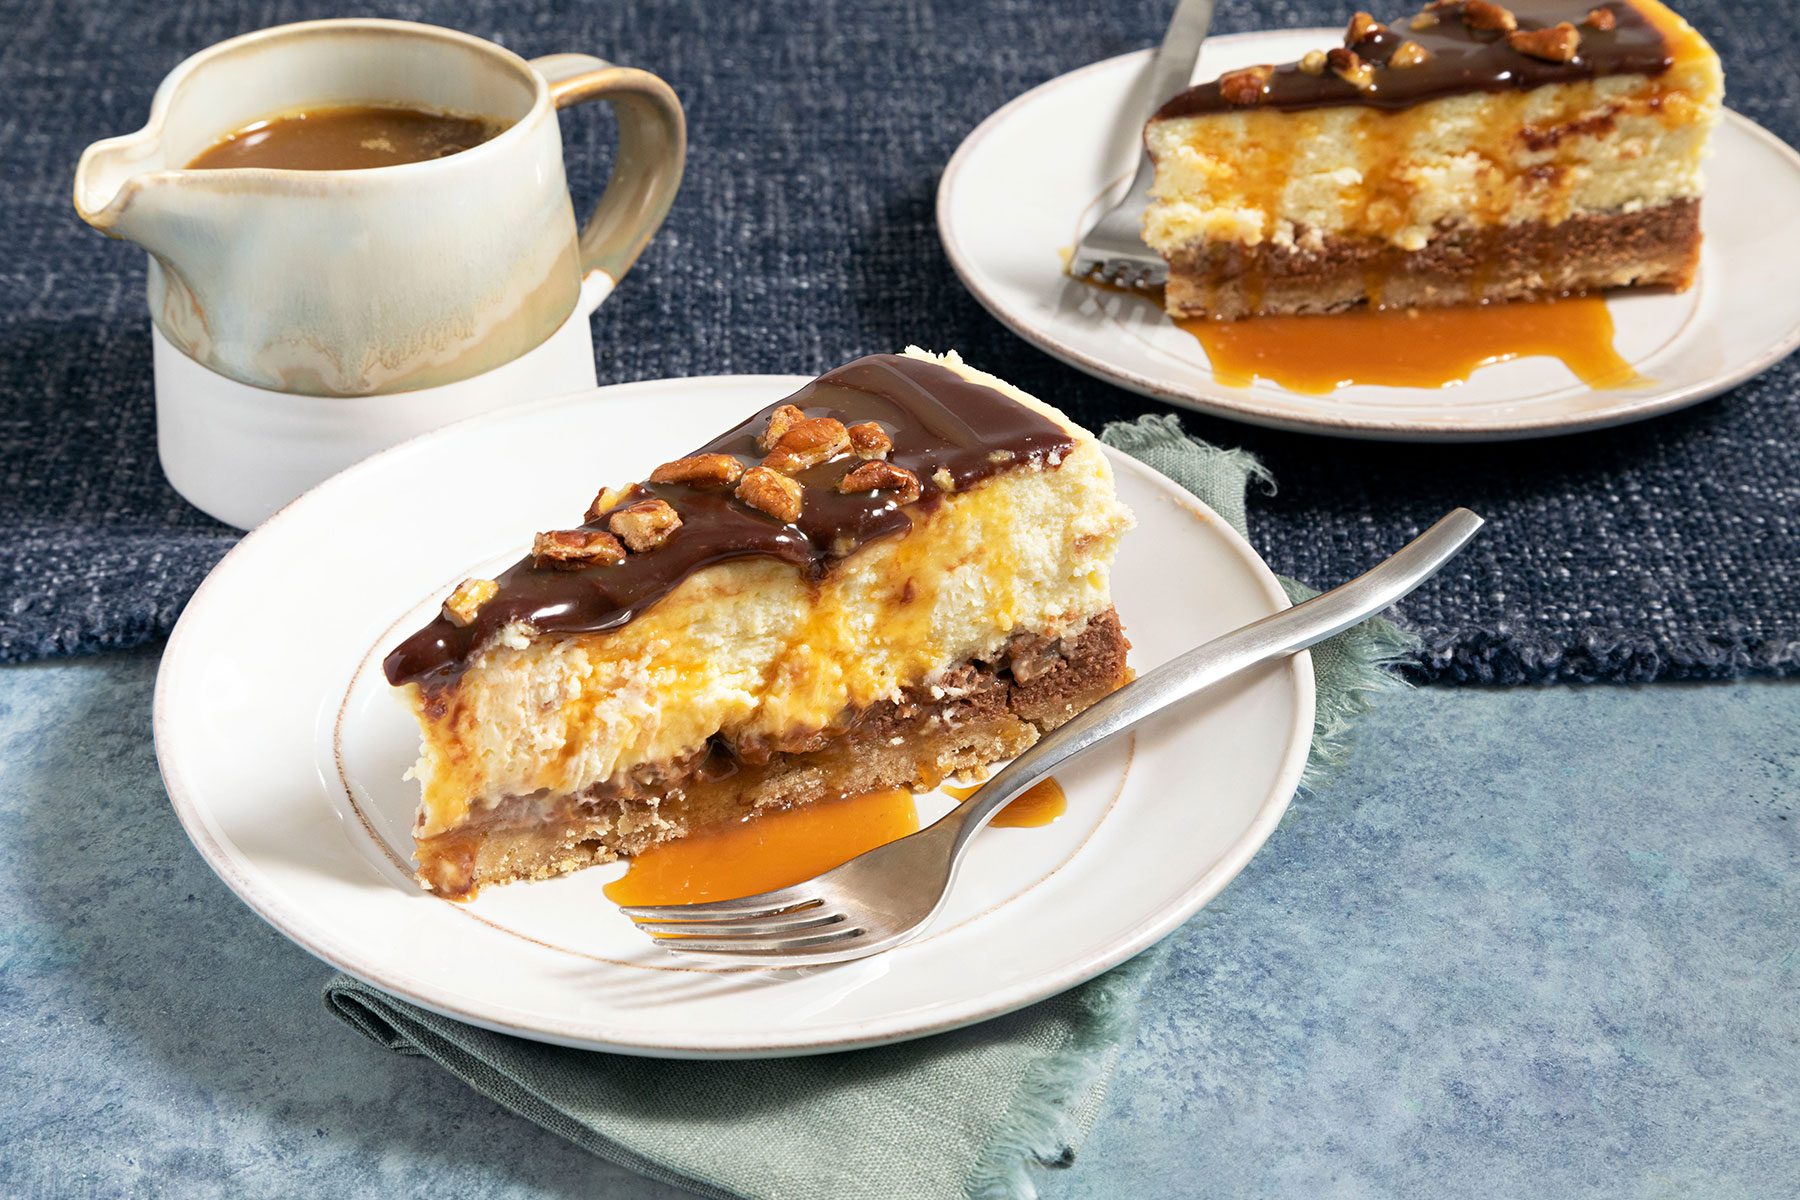 Slices of Layered Turtle Cheesecake served on plates with fork and melted caramel in small pot on side